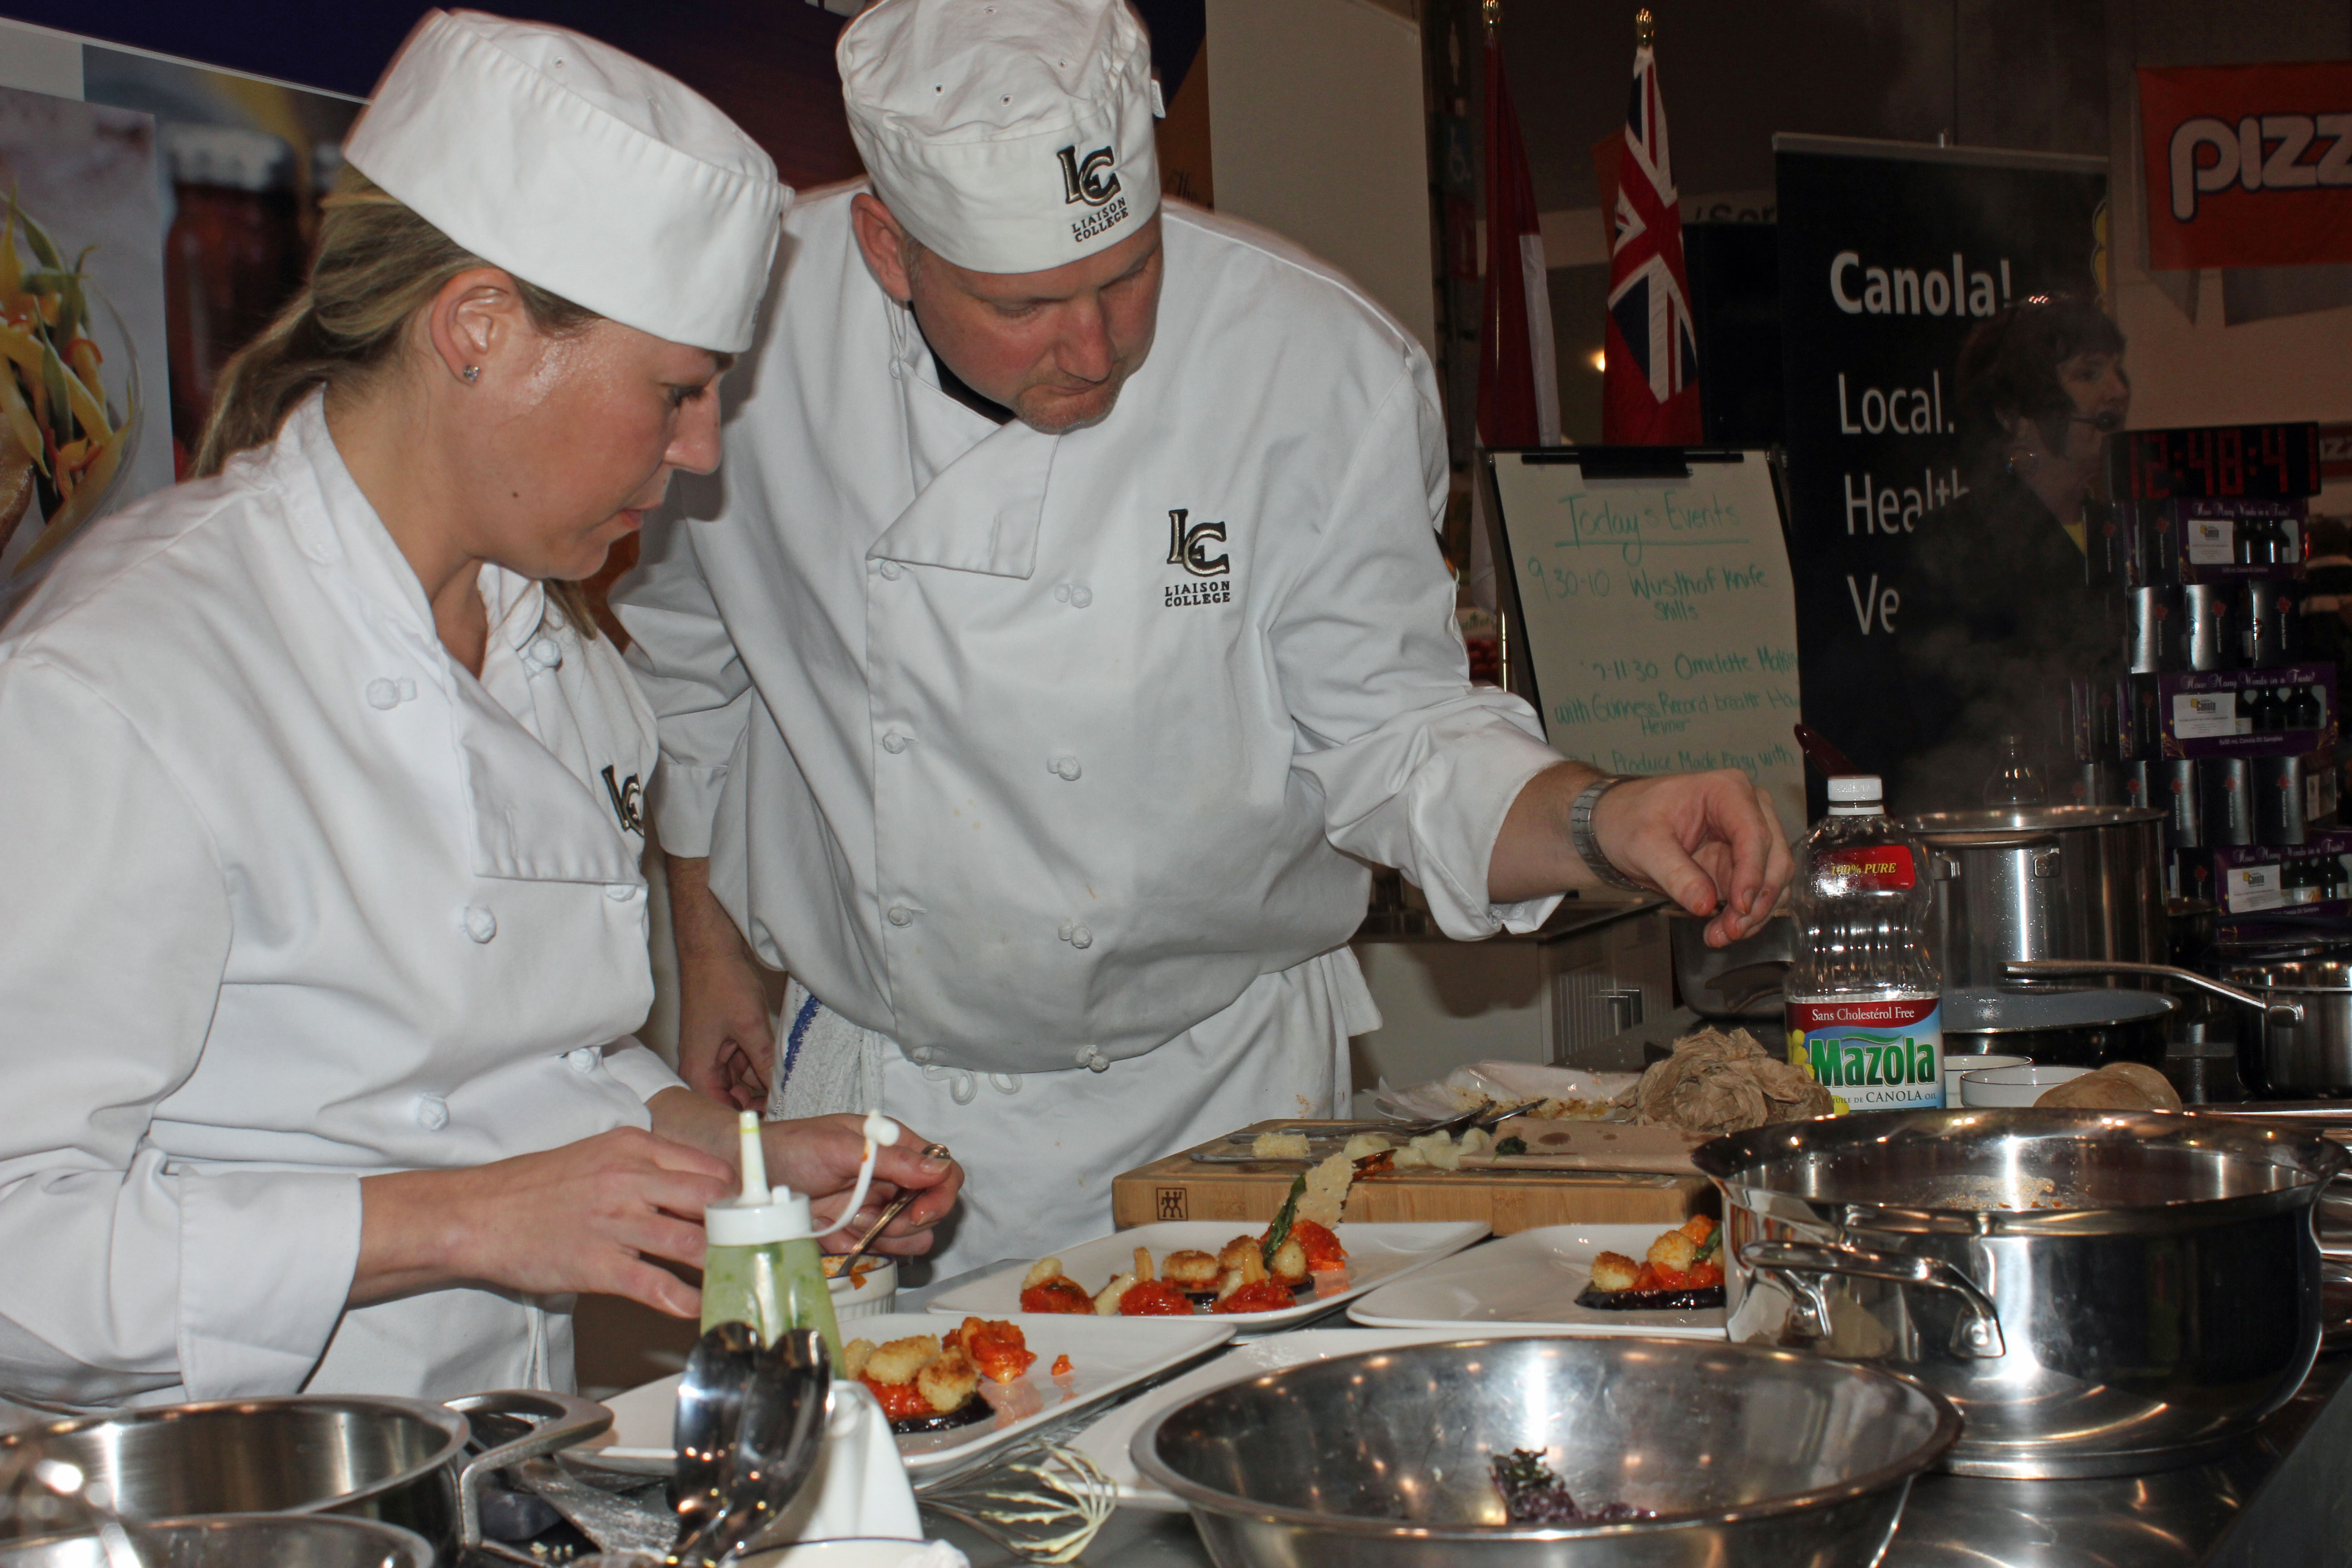 Samantha Lazuric and David McCulloch Fight the Clock to Win Best New Student Chefs in Canada